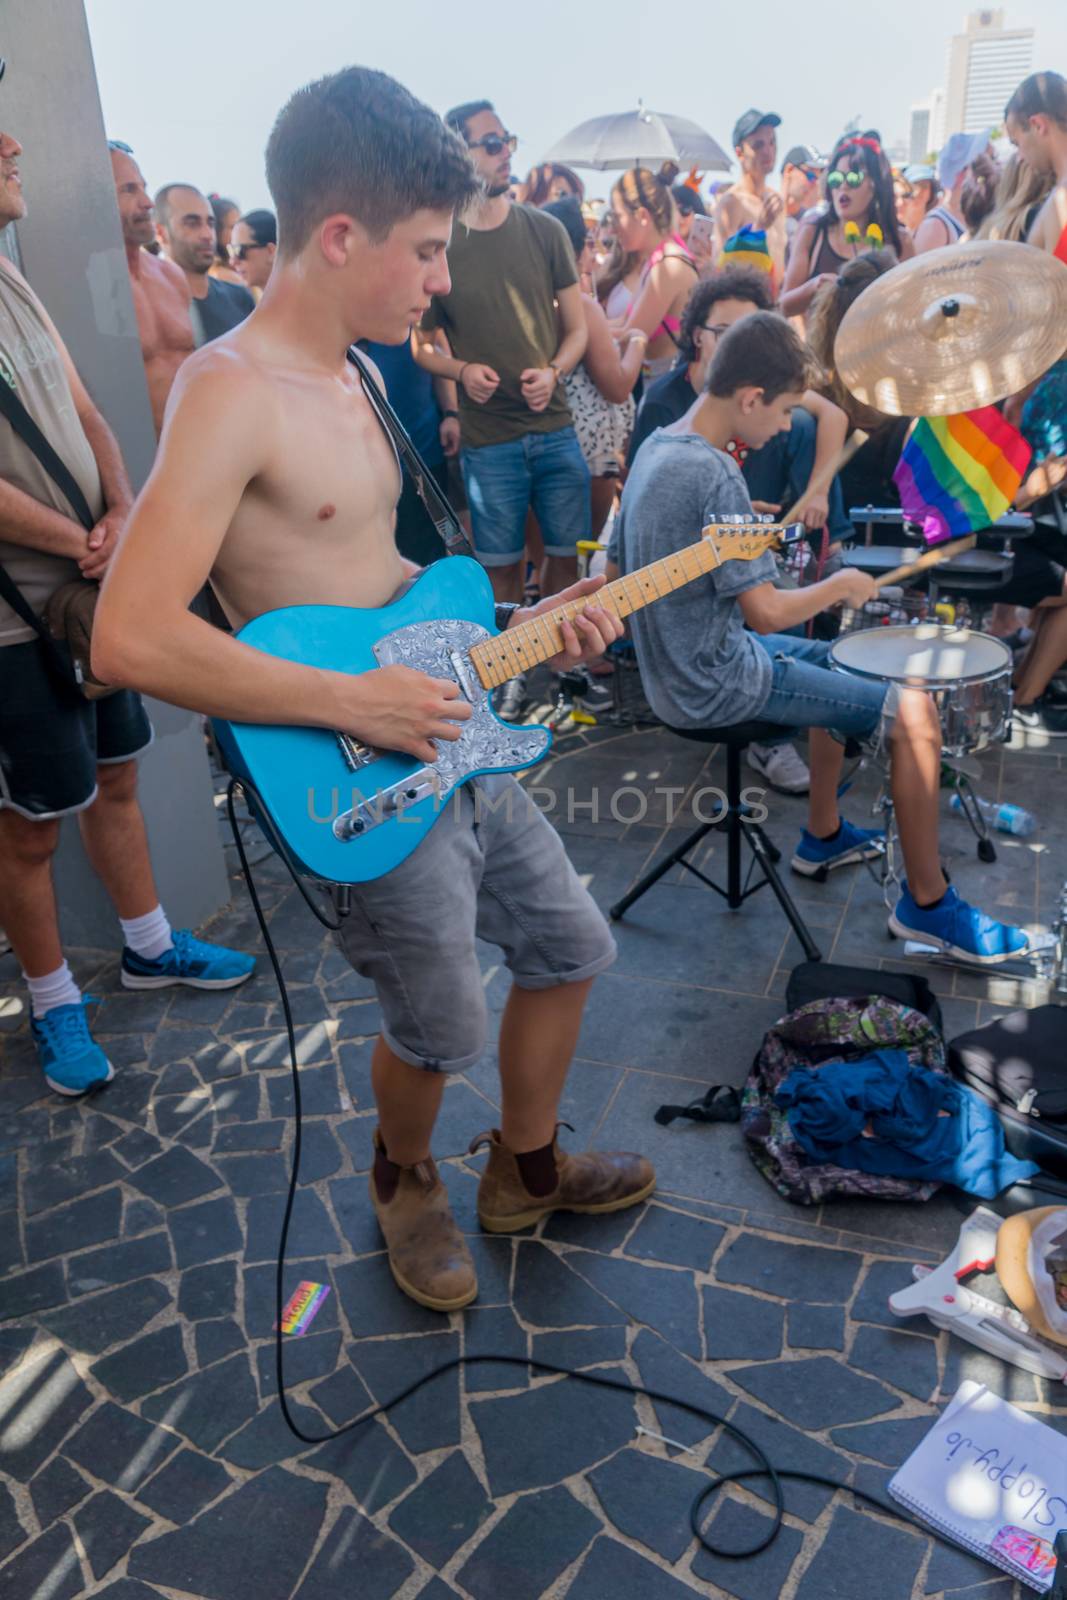 TEL-AVIV, ISRAEL - JUNE 08, 2018: People play music to the celebrating crowd in the annual pride parade of the LGBT community, in Tel-Aviv, Israel